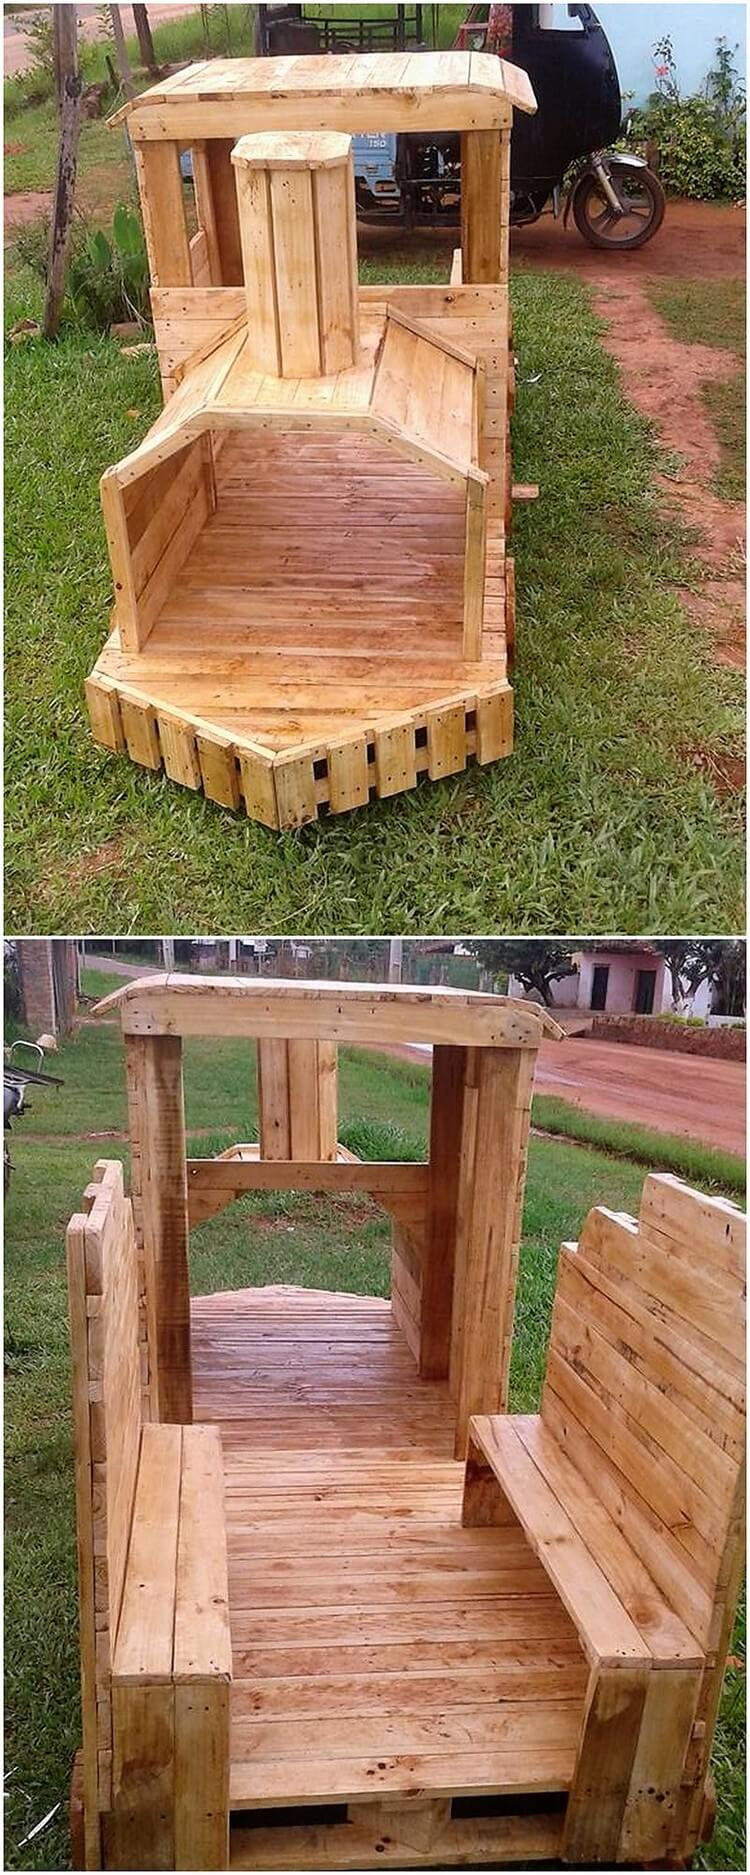 DIY With Wooden Pallets
 Splendid DIY Recycled Wood Pallet Creations